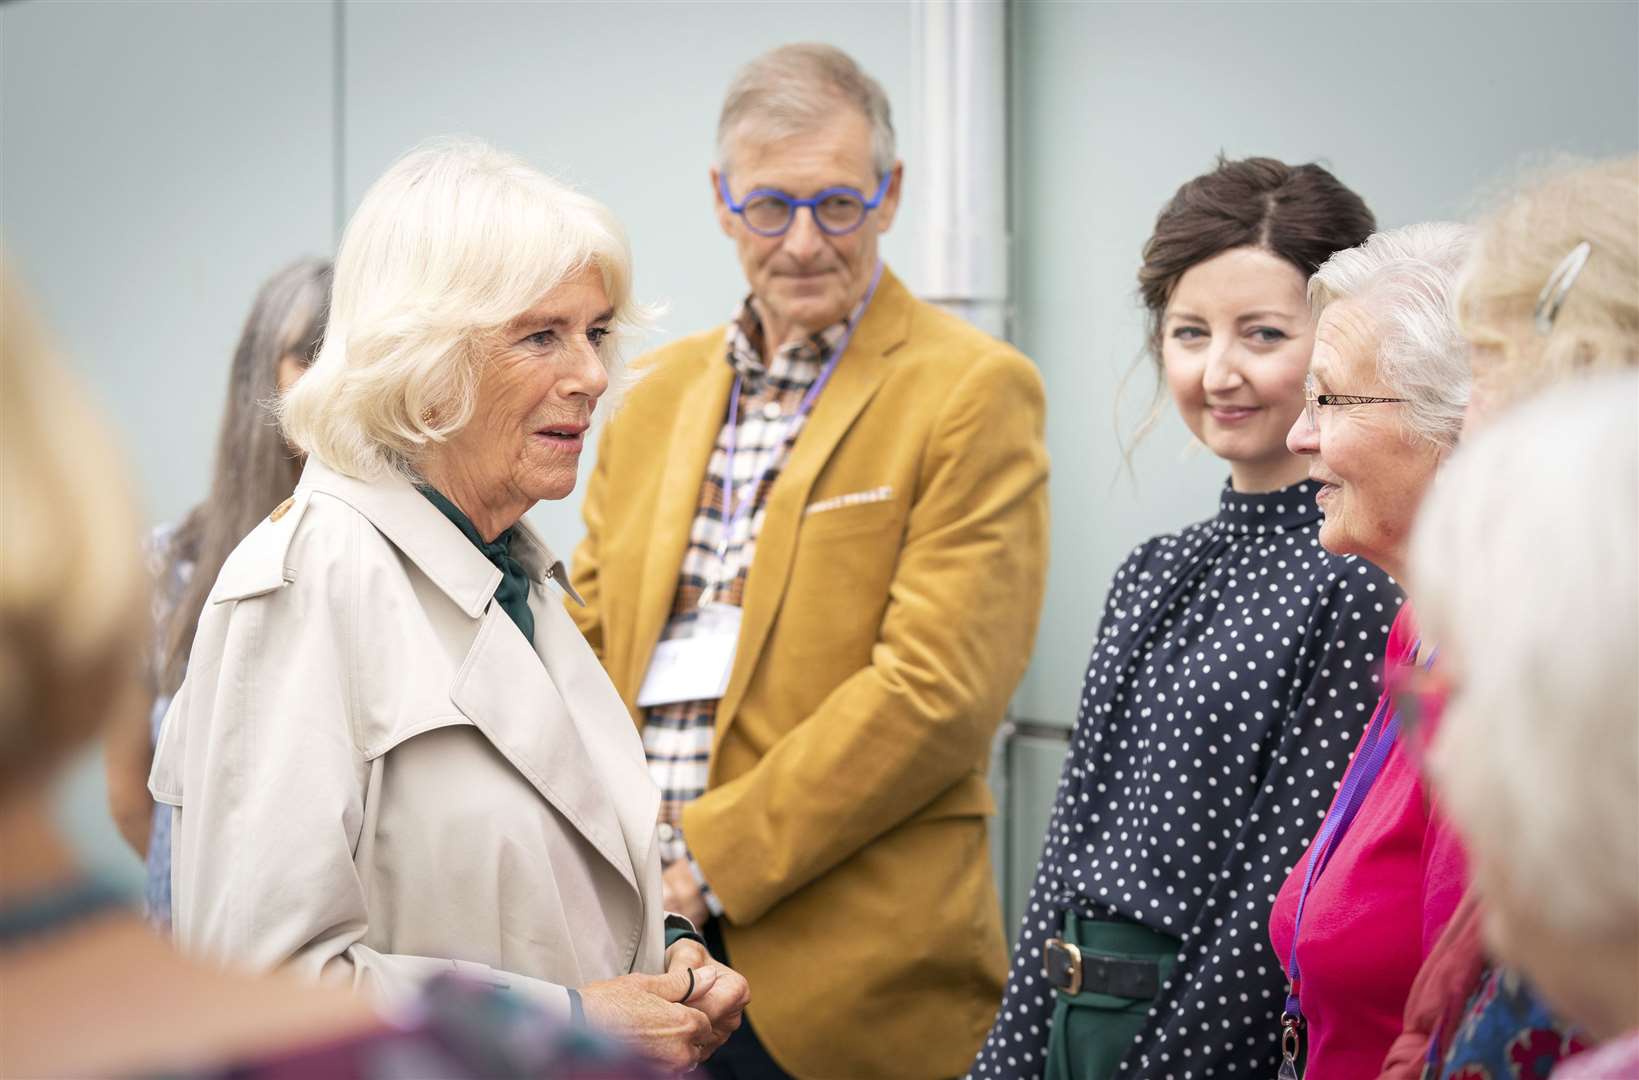 The Duchess of Rothesay during a visit to Nairn Book and Arts Festival and the environment charity Green Hive, at Nairn Community Centre. Picture: Jane Barlow/PA Wire